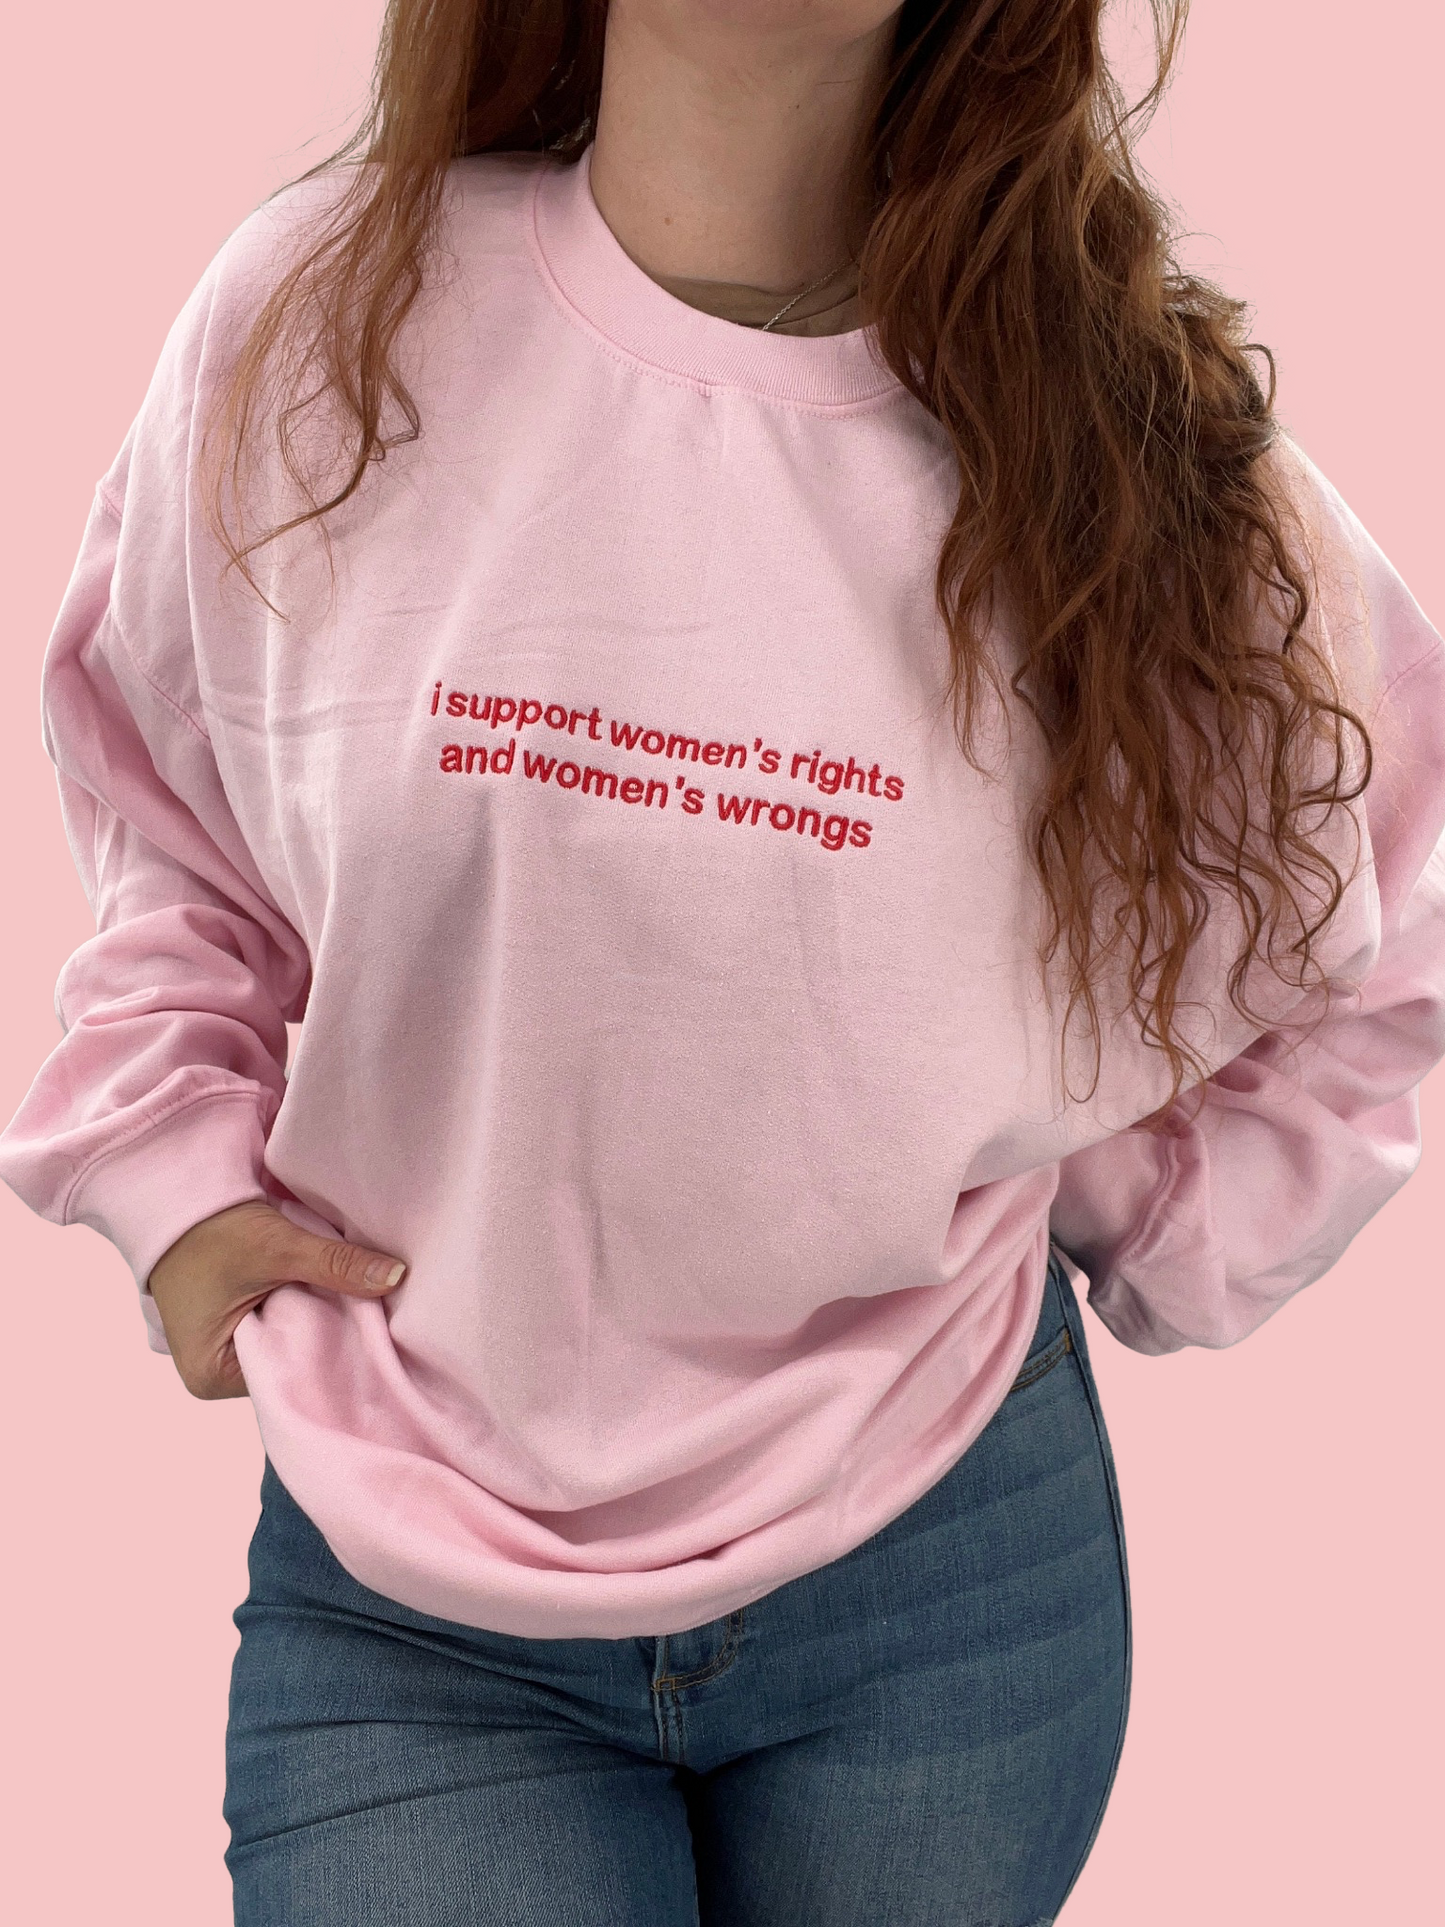 I Support Women's Rights and Wrongs Embroidered T-Shirt or Sweatshirt